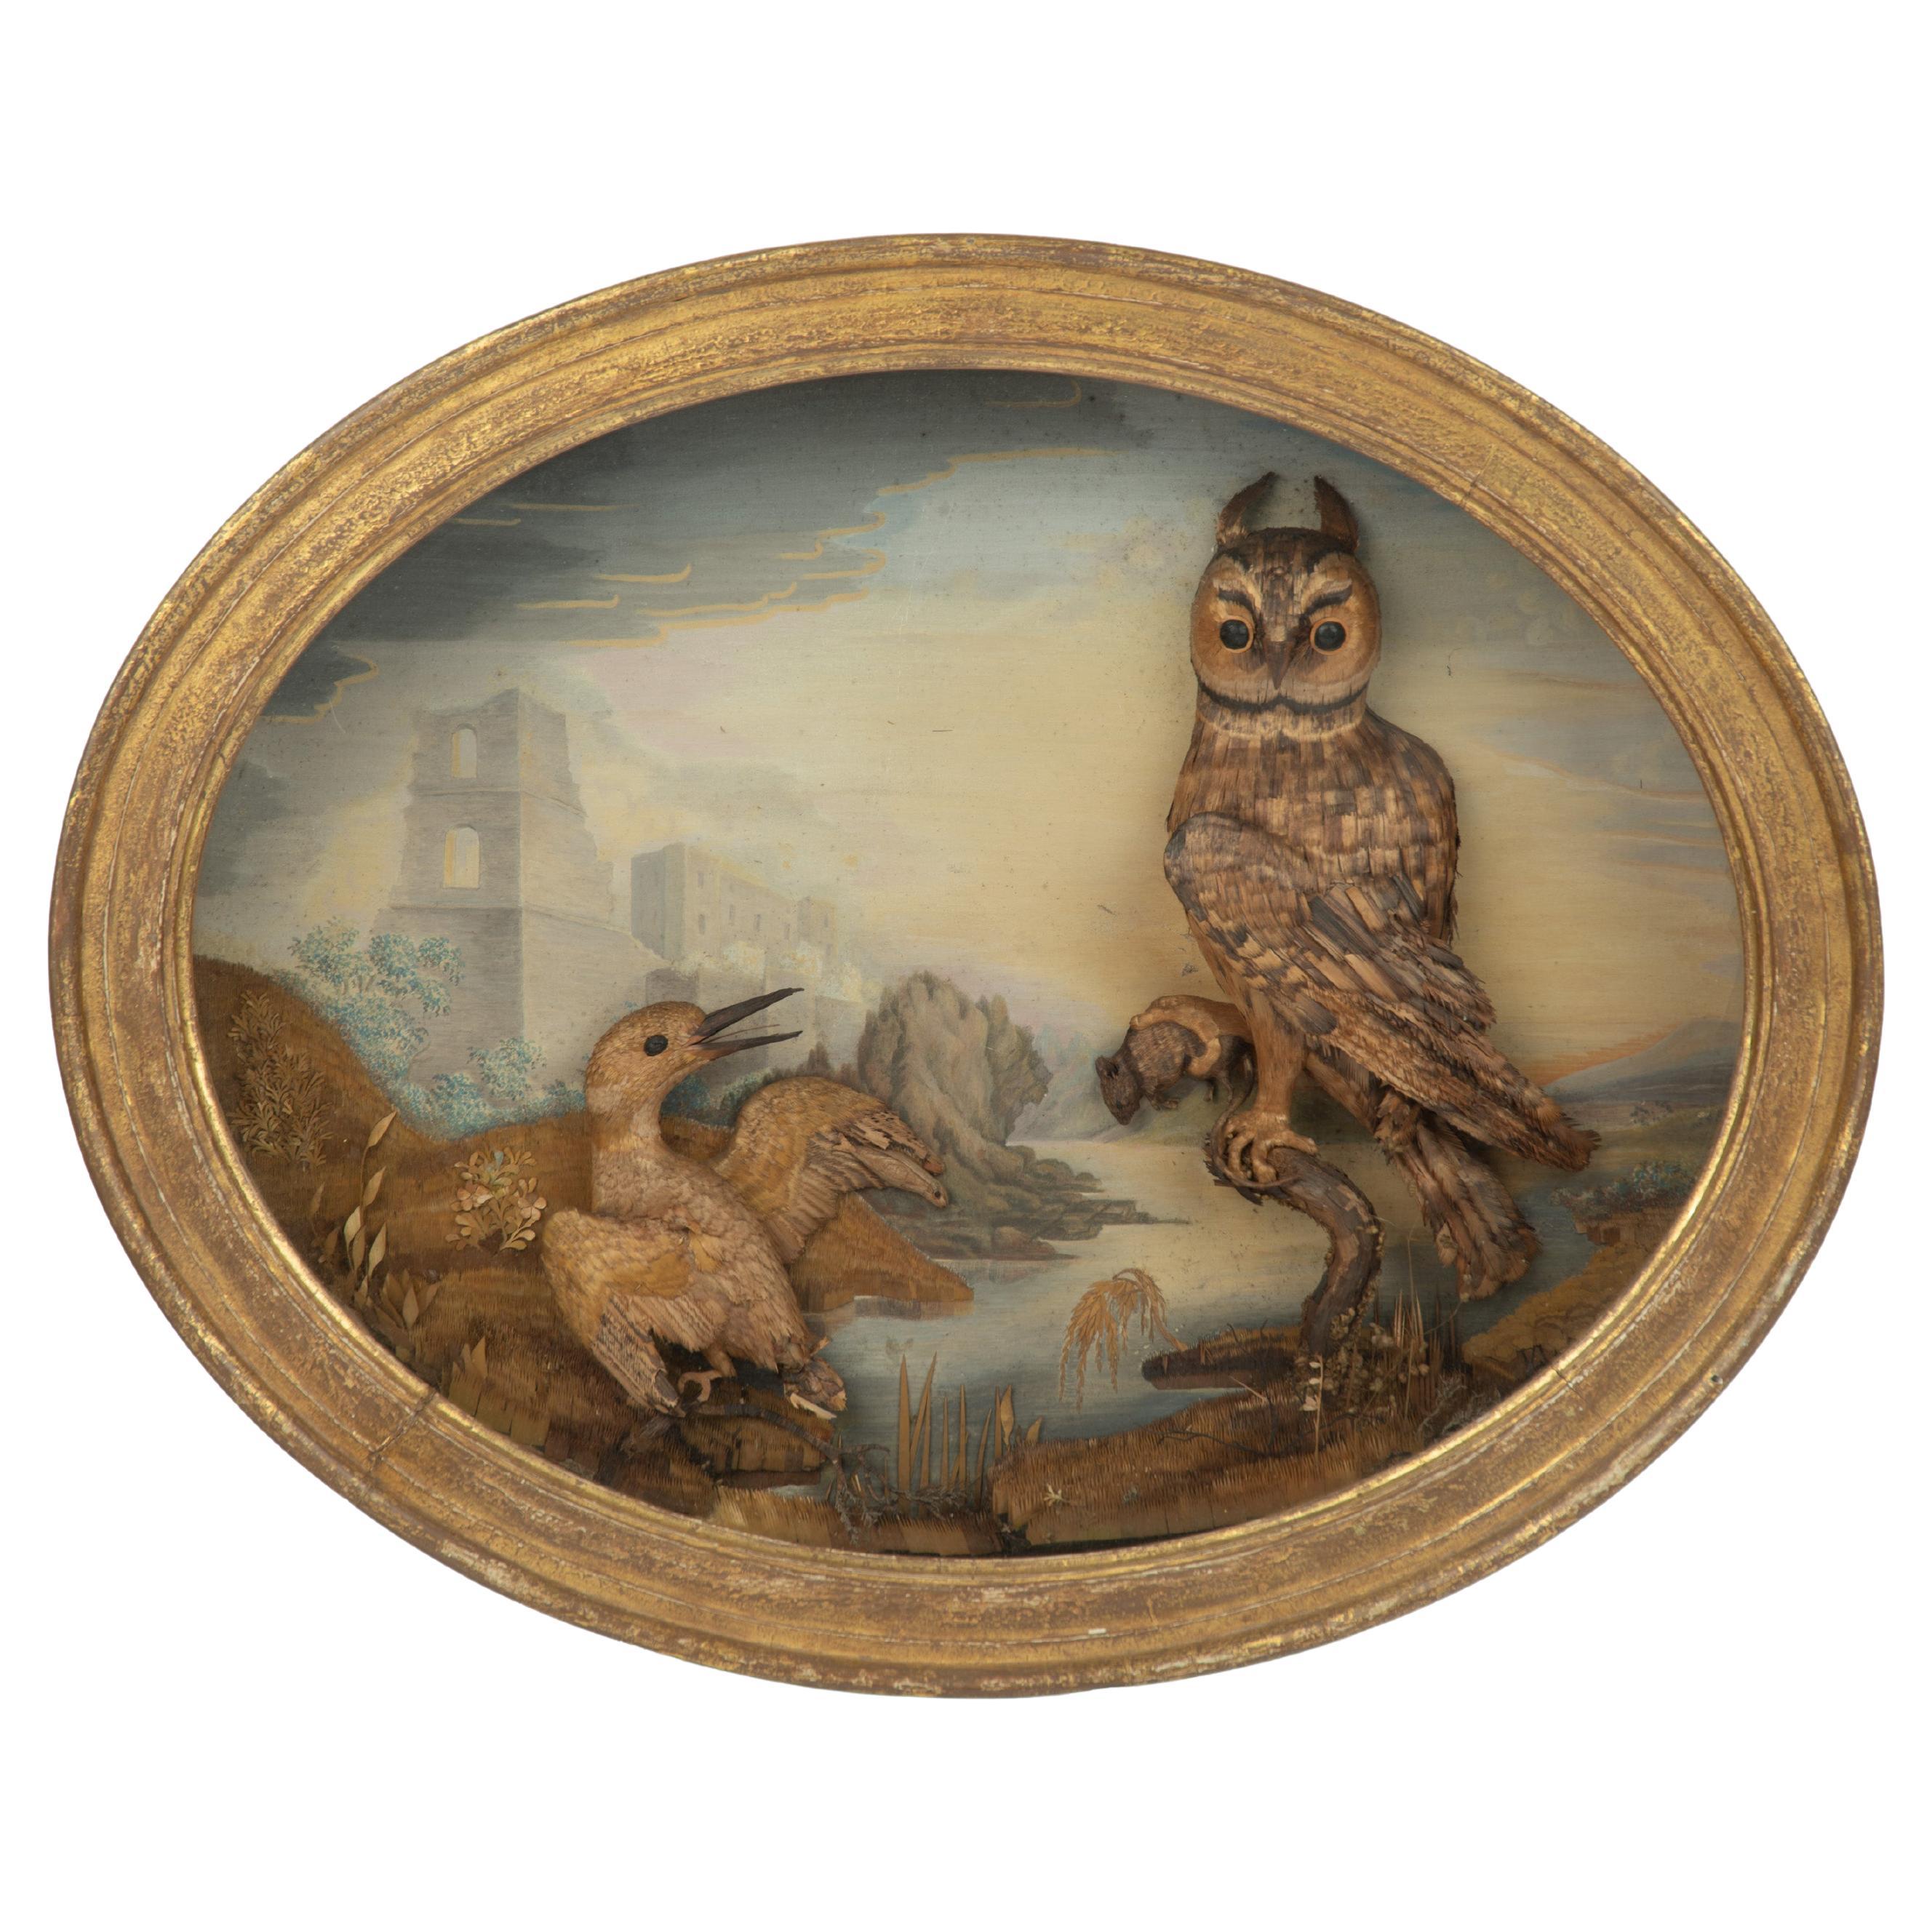 An exceptional straw work diorama of an owl and kingfisher - Leverian Museum For Sale